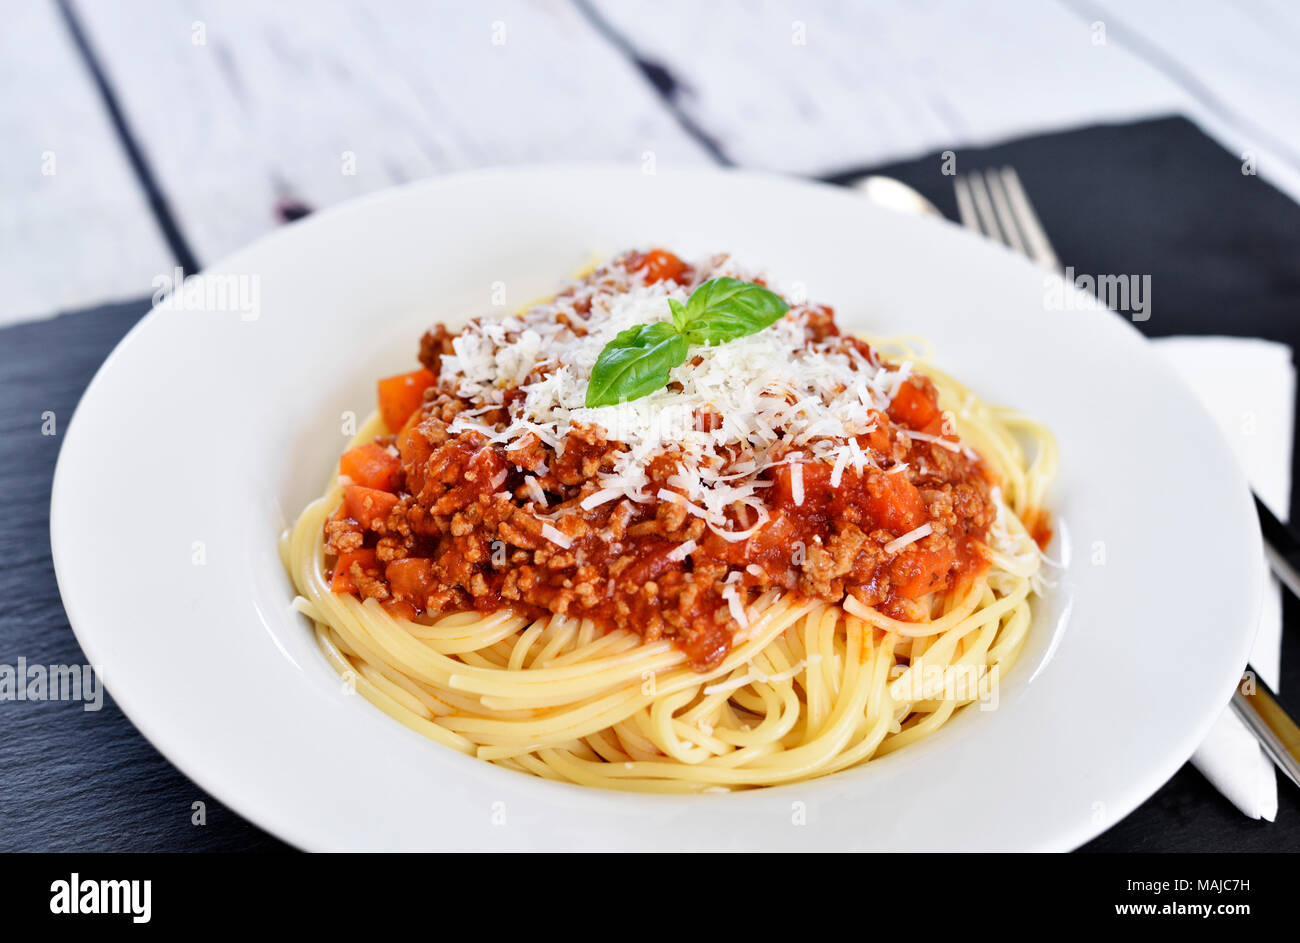 Delicious pasta meal, spaghetti bolognese on a white plate. Pasta Dish, traditional italian food with parmesan cheese, minced meat and basil leaf. Stock Photo